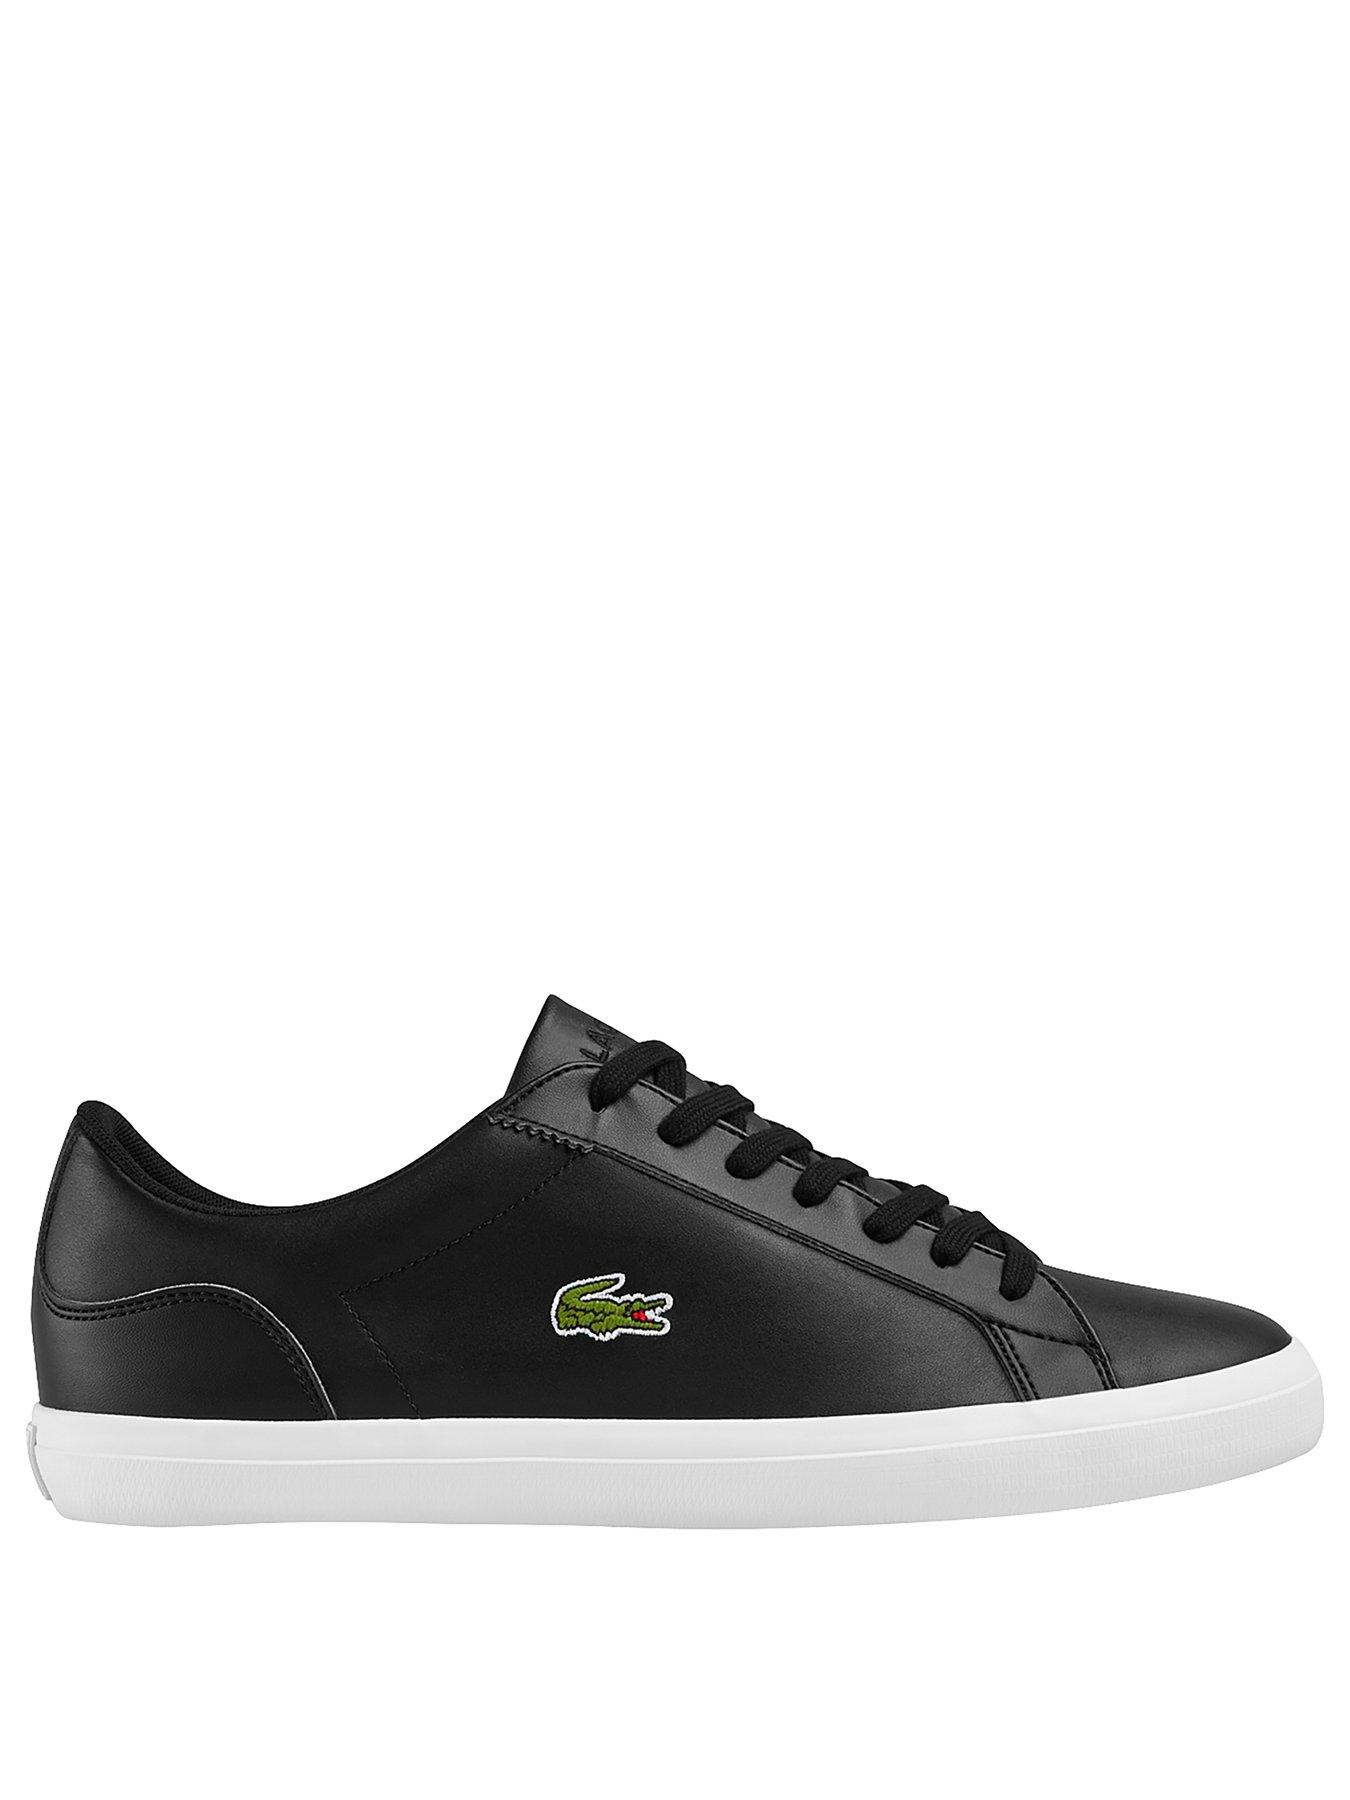 Lacoste Lerond Leather Trainers - Black 